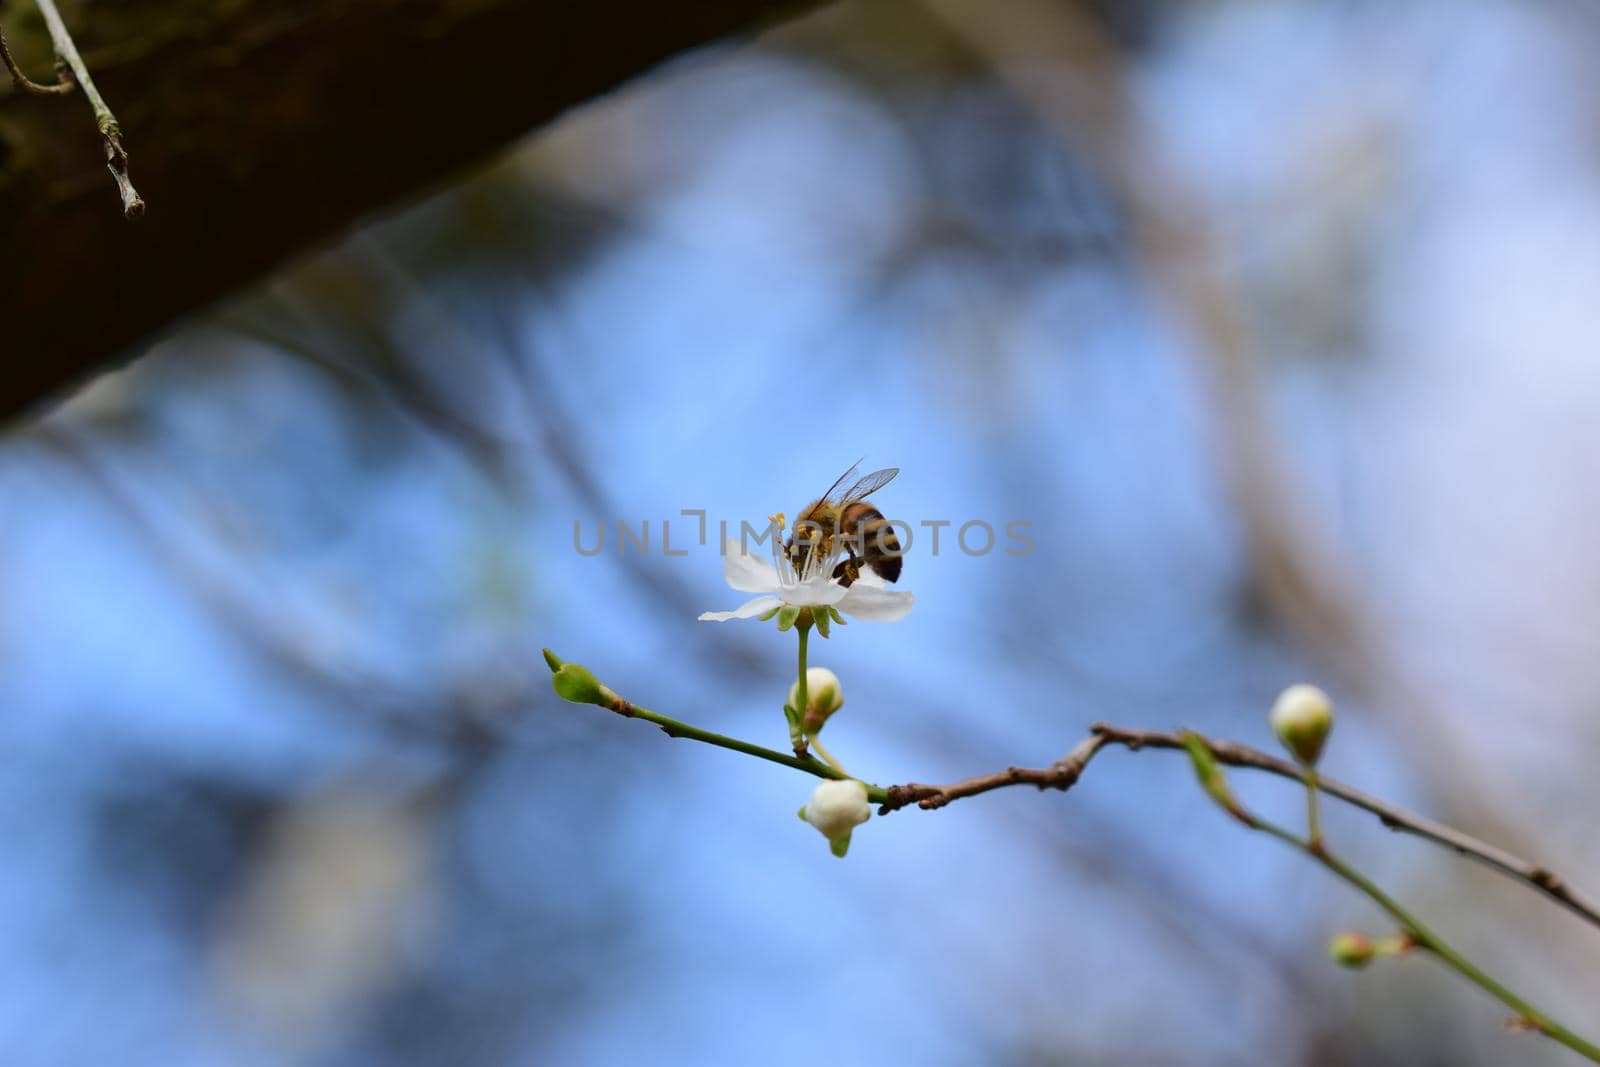 Close up of a honey bee on white blossom against a blurry background